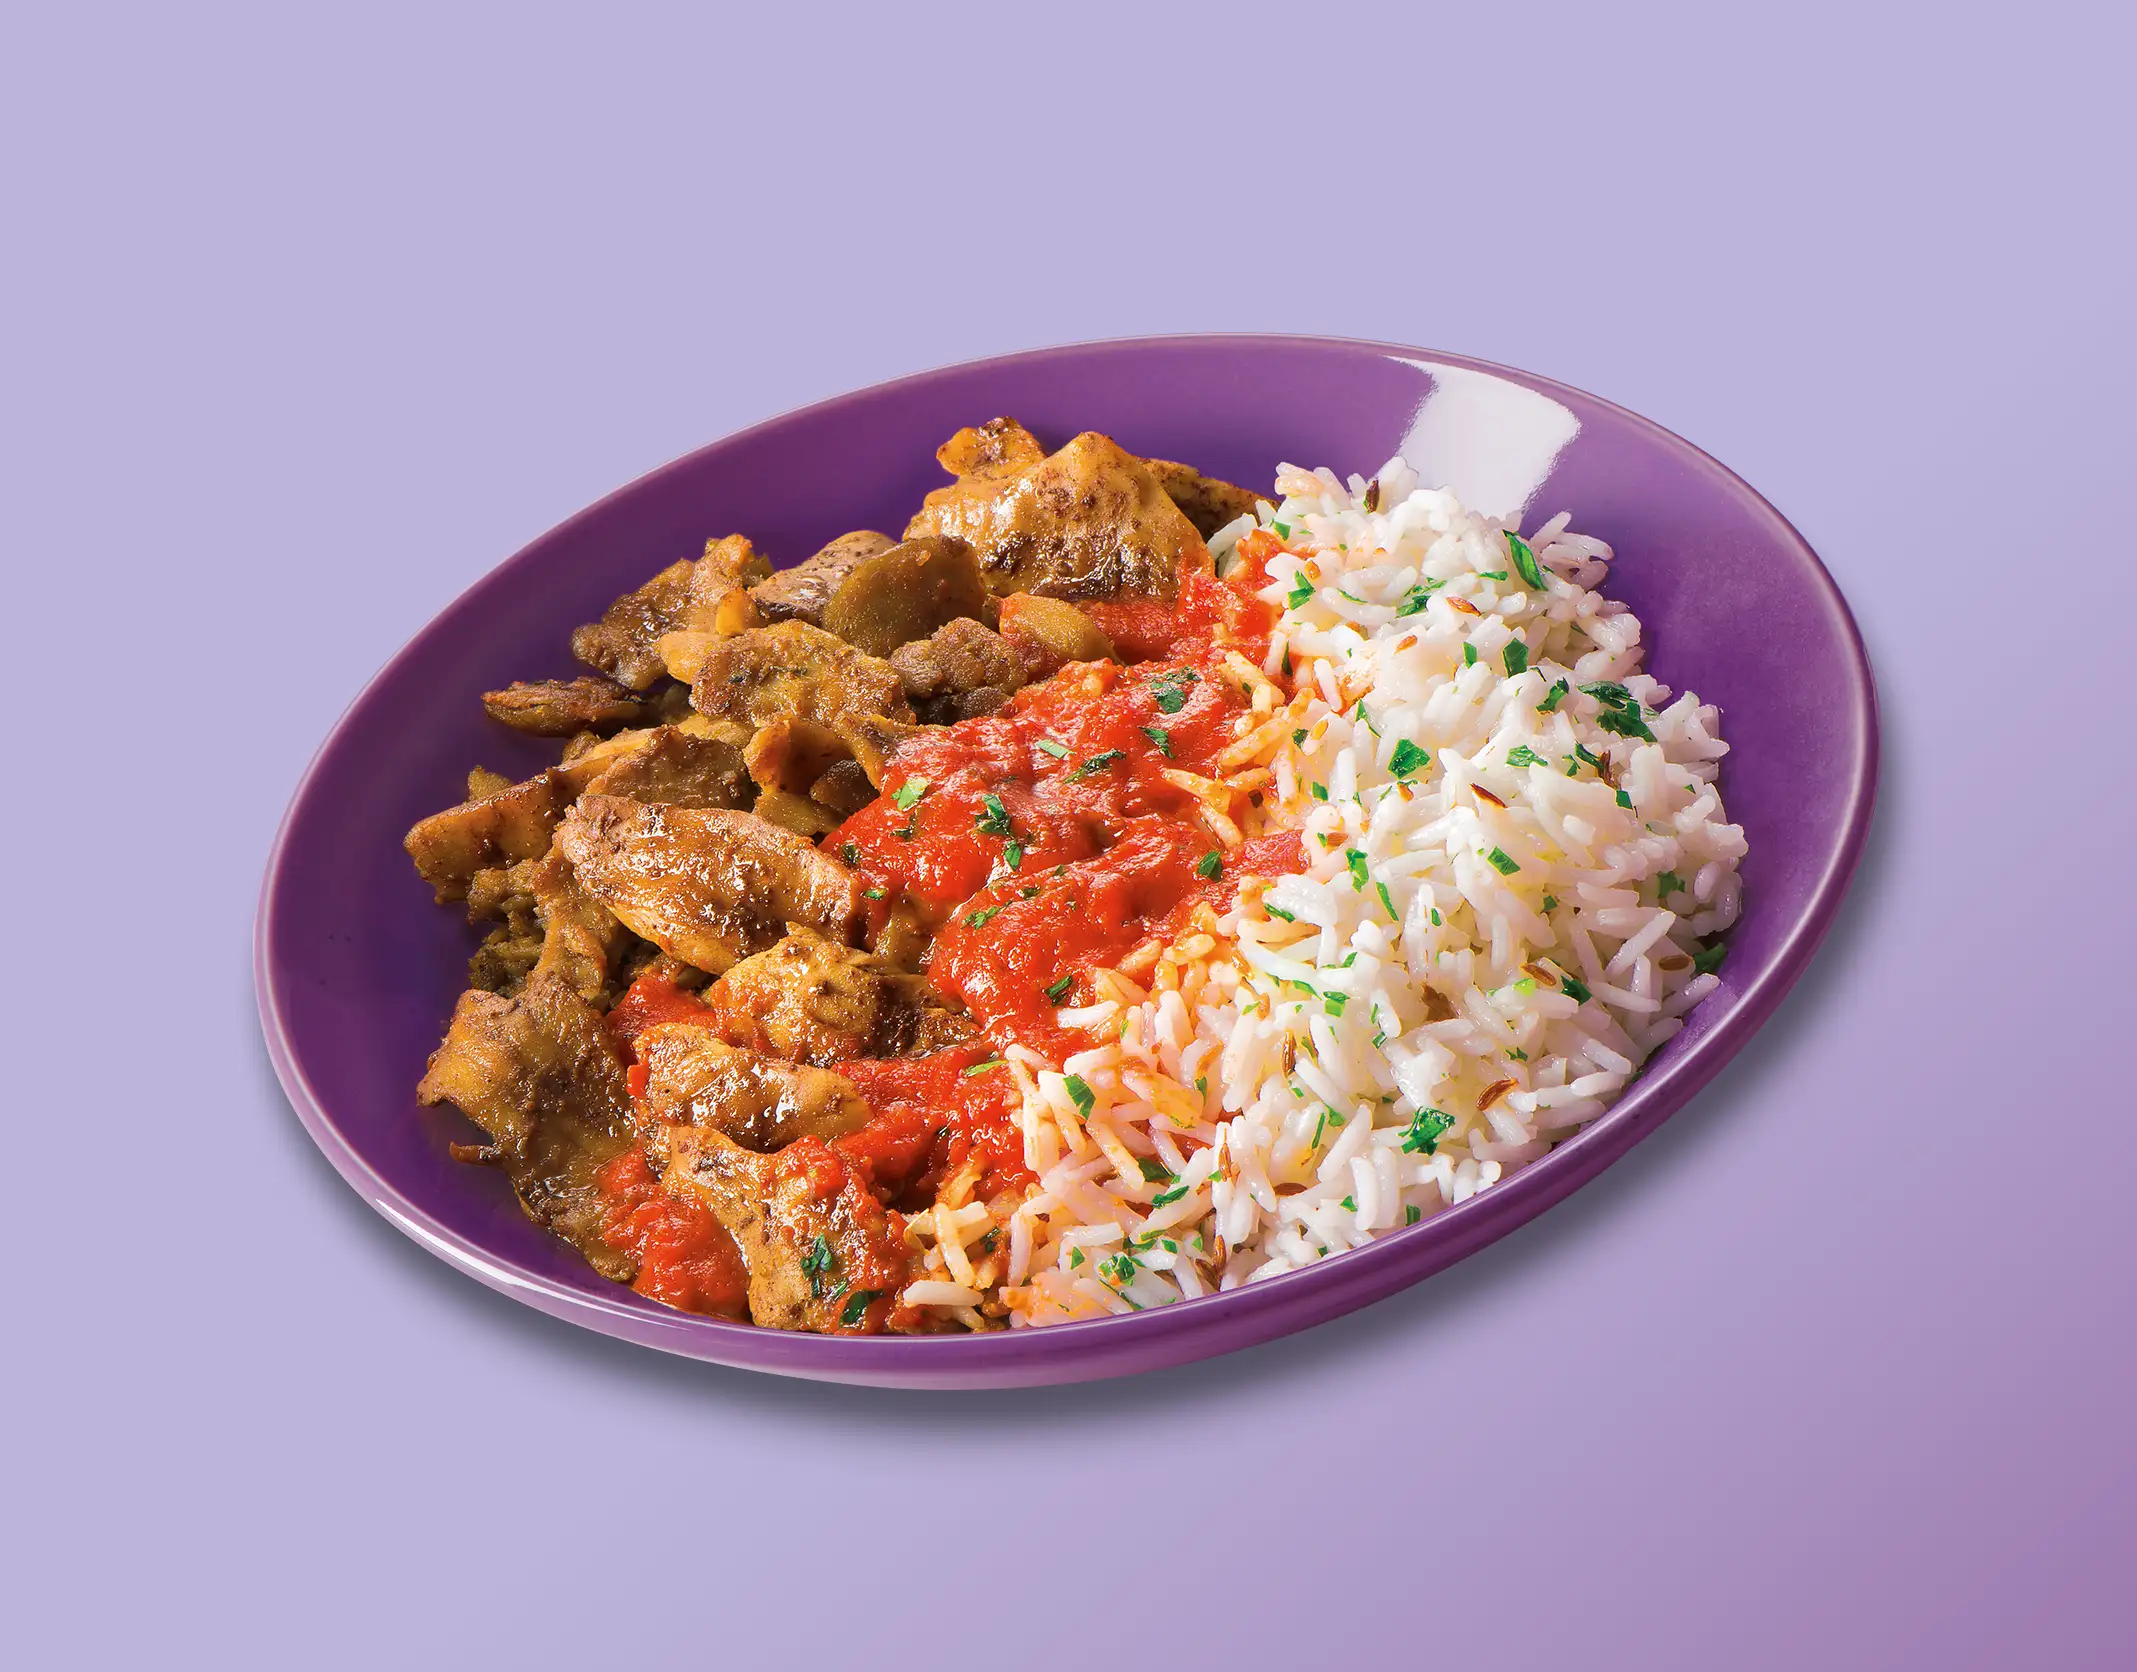 Kebab Veg in a red sauce with Basmati rice